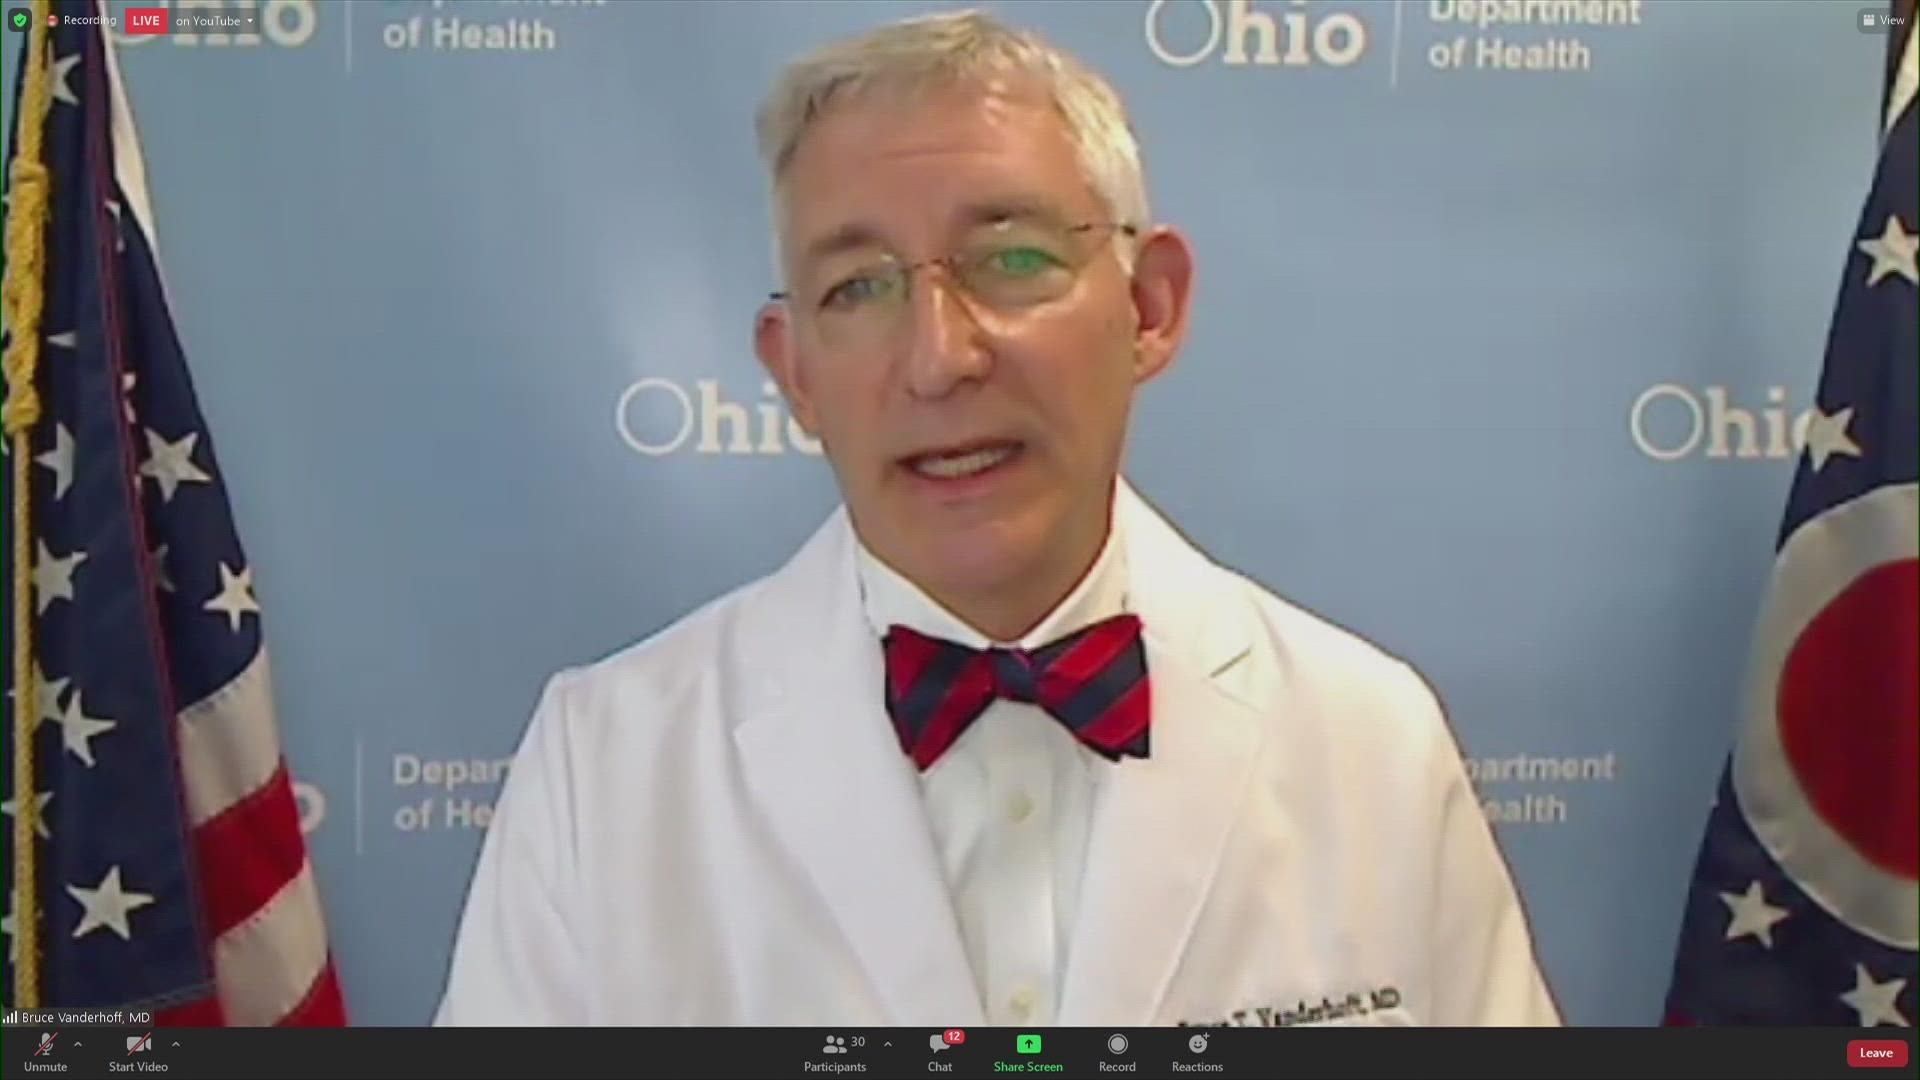 The state of Ohio has seen a growing number of infections for six weeks in a row.